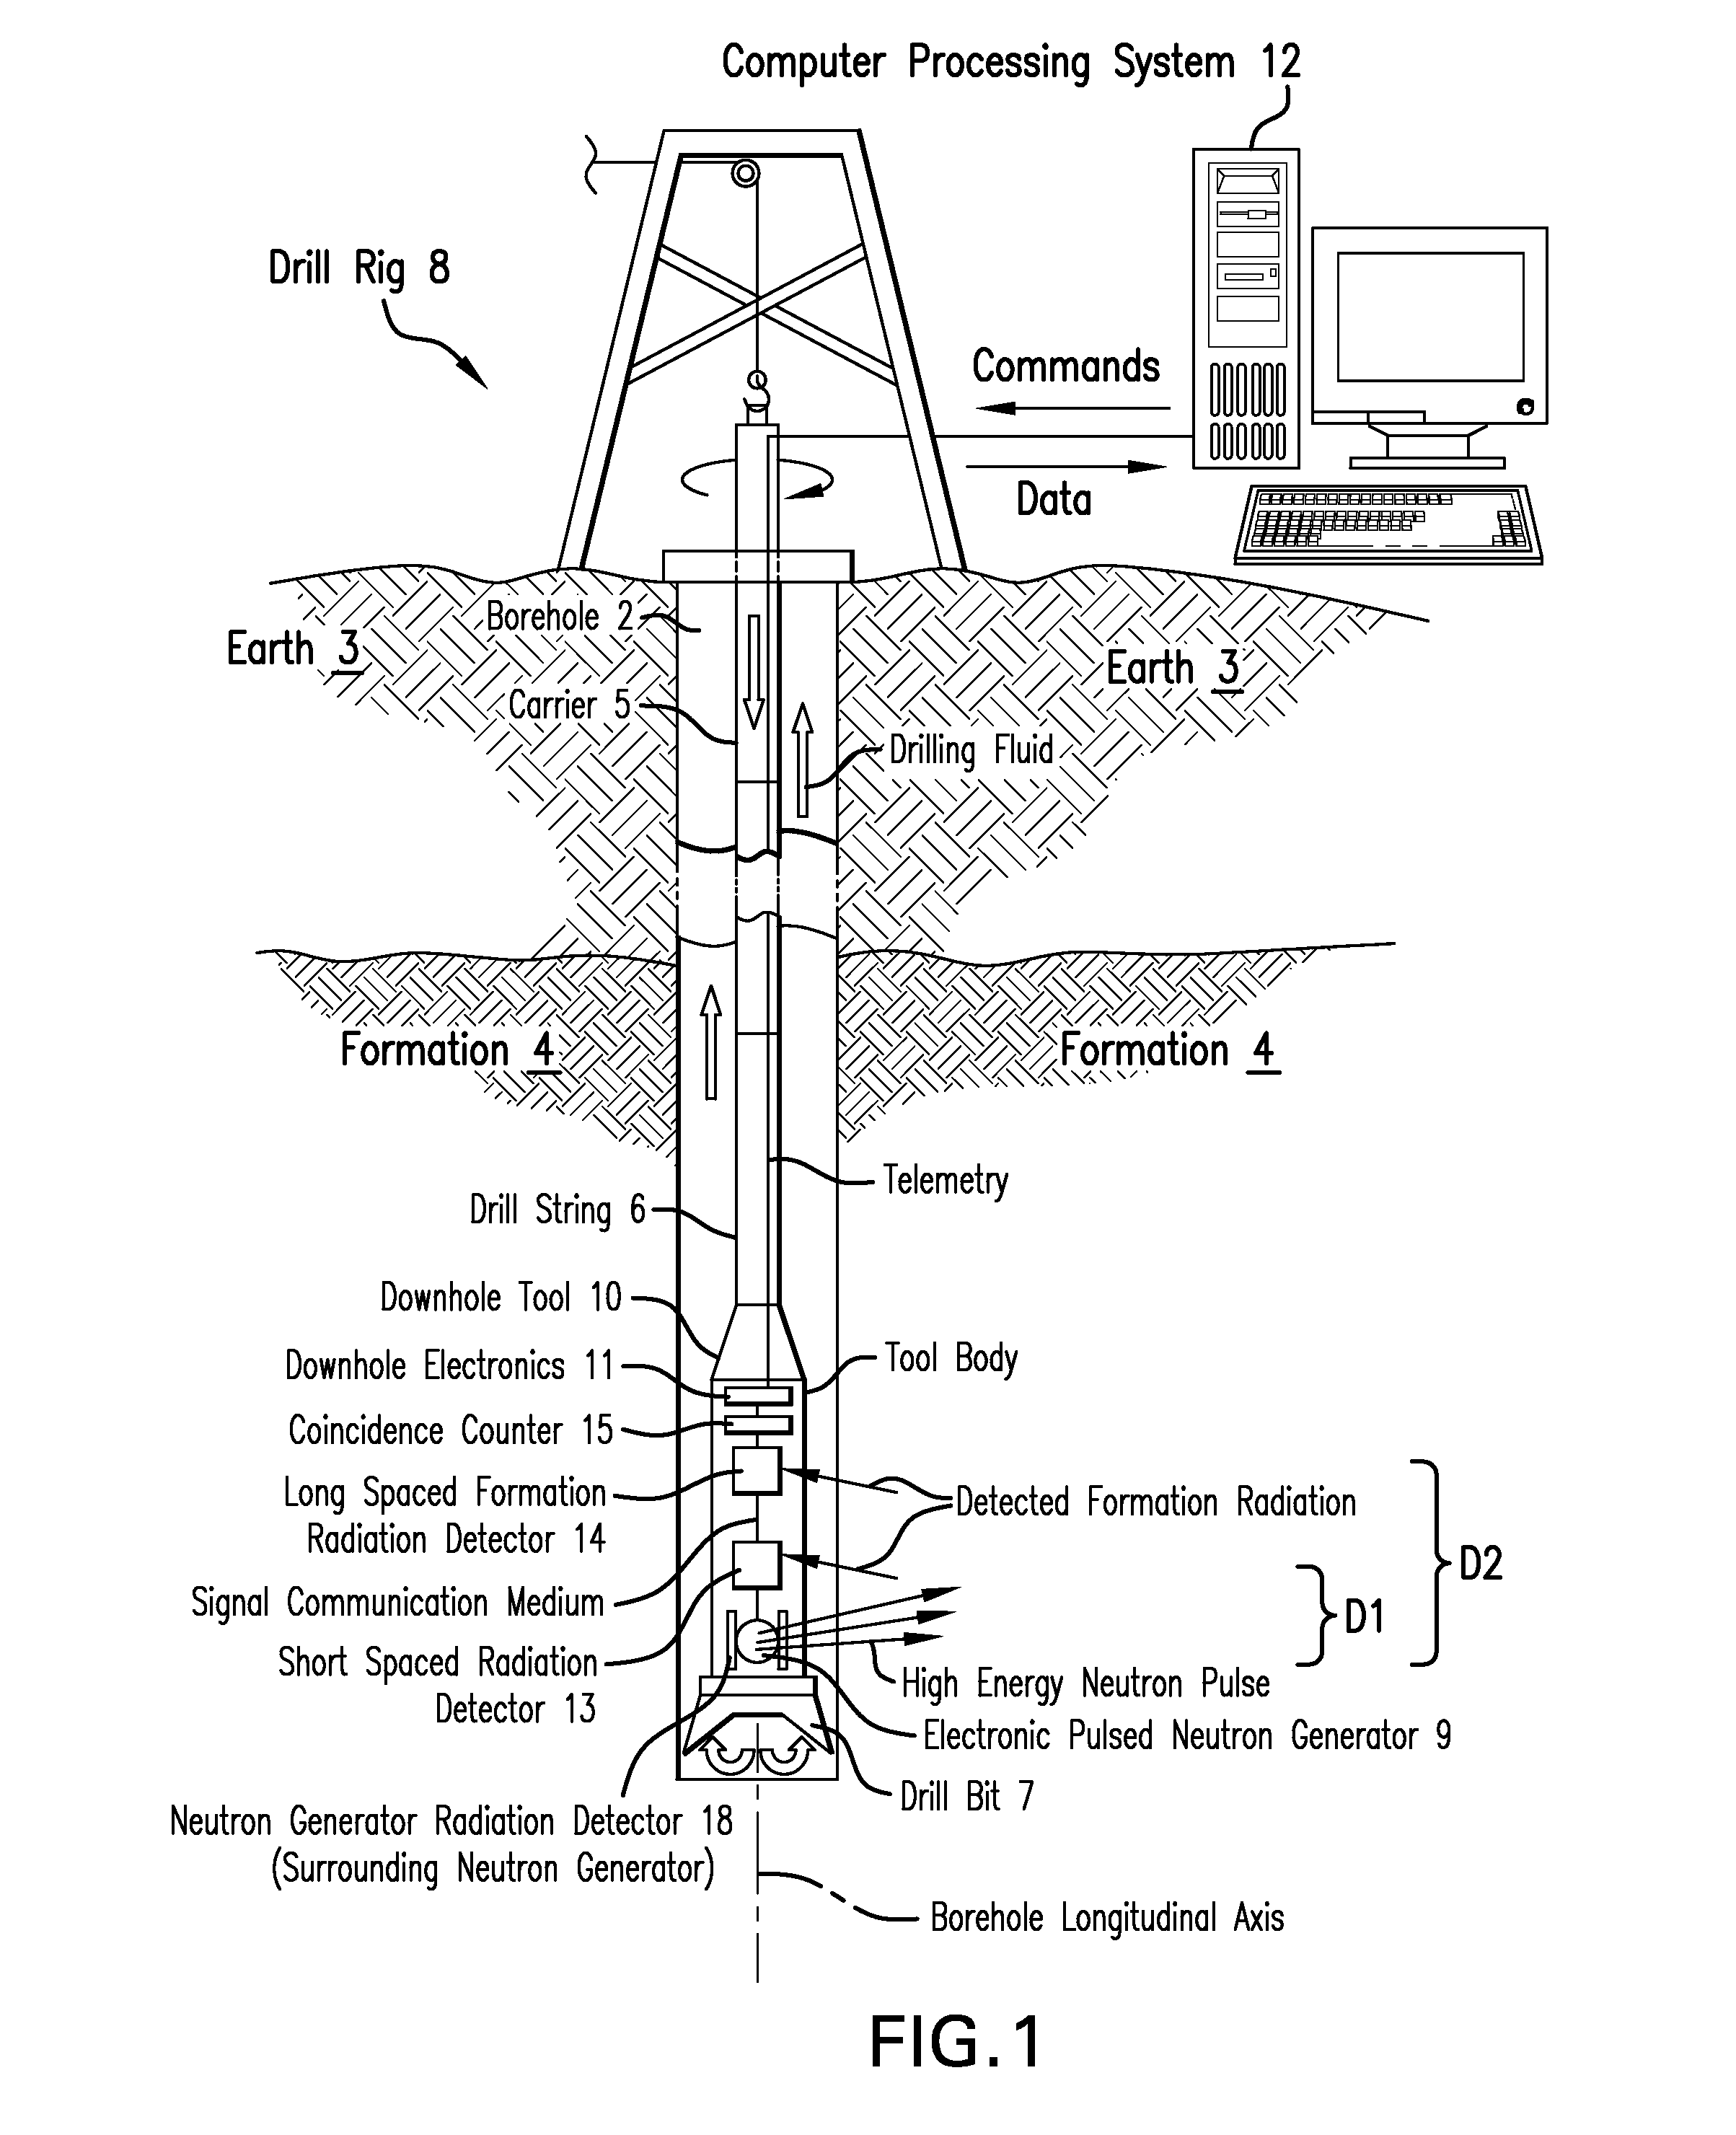 Measurement technique utilizing novel radiation detectors in and near pulsed neutron generator tubes for well logging applications using solid state materials